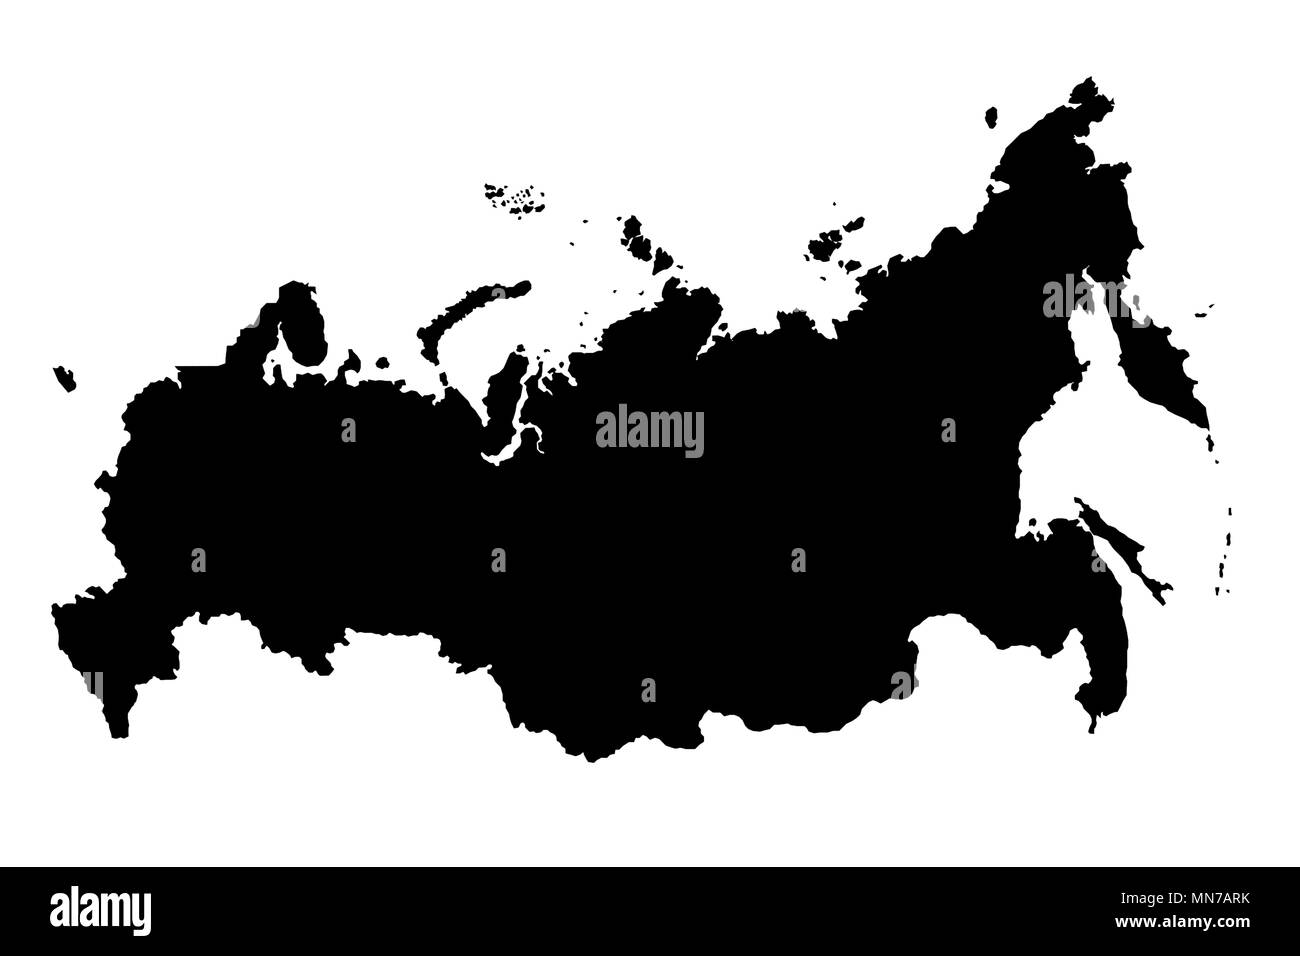 Map Of Russia Black Silhouette 3D Illustration Stock Photo